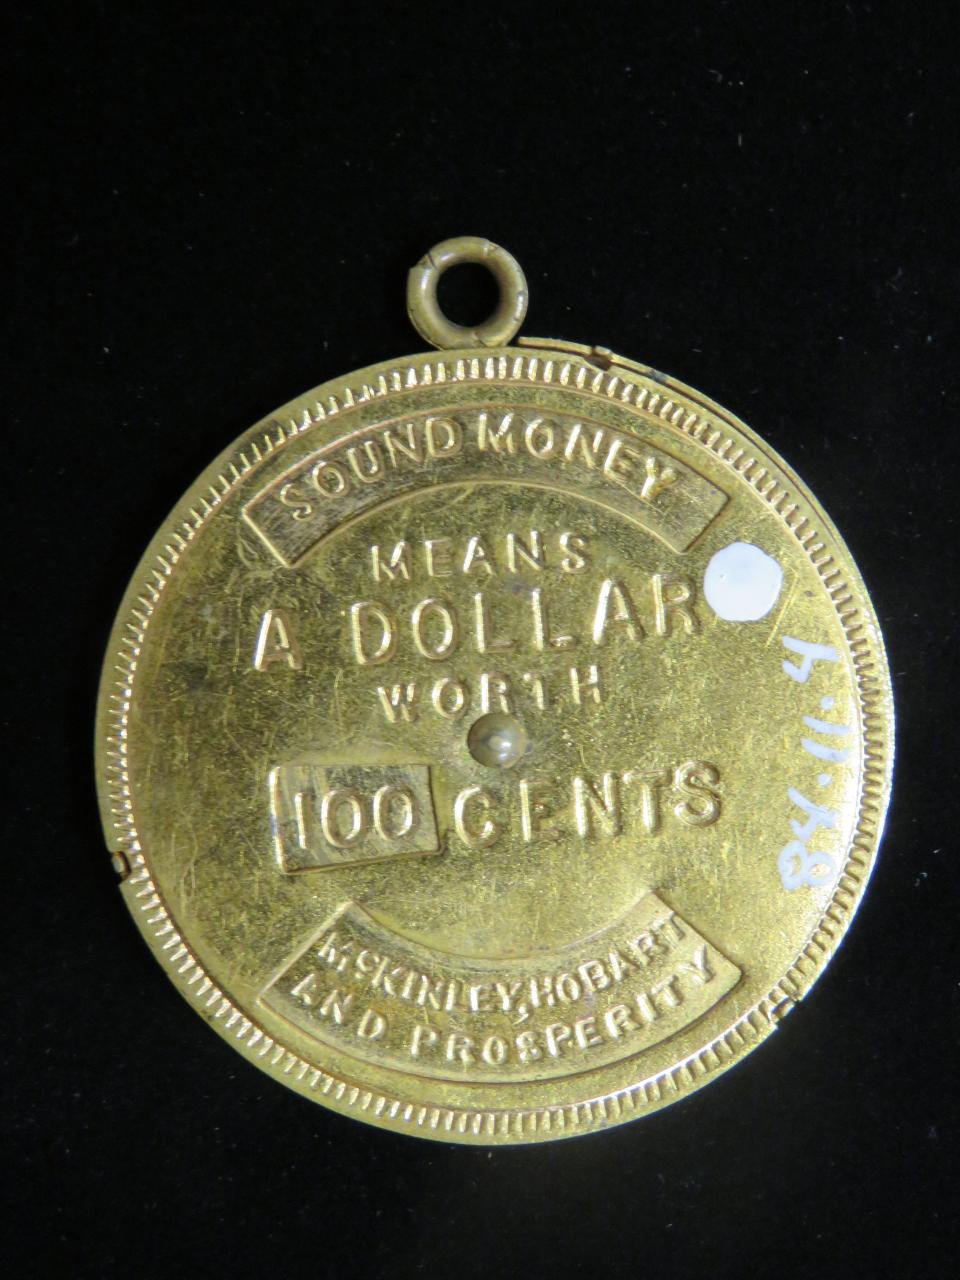 Kait Bergert, collections manager of McKinley Presidential Library & Museum, provided this artifact from the museum's collection to show President William McKinley's belief in "Sound Money" tied to gold. "Sound Money Means a Dollar (is) Worth 100 Cents," the inscription says.